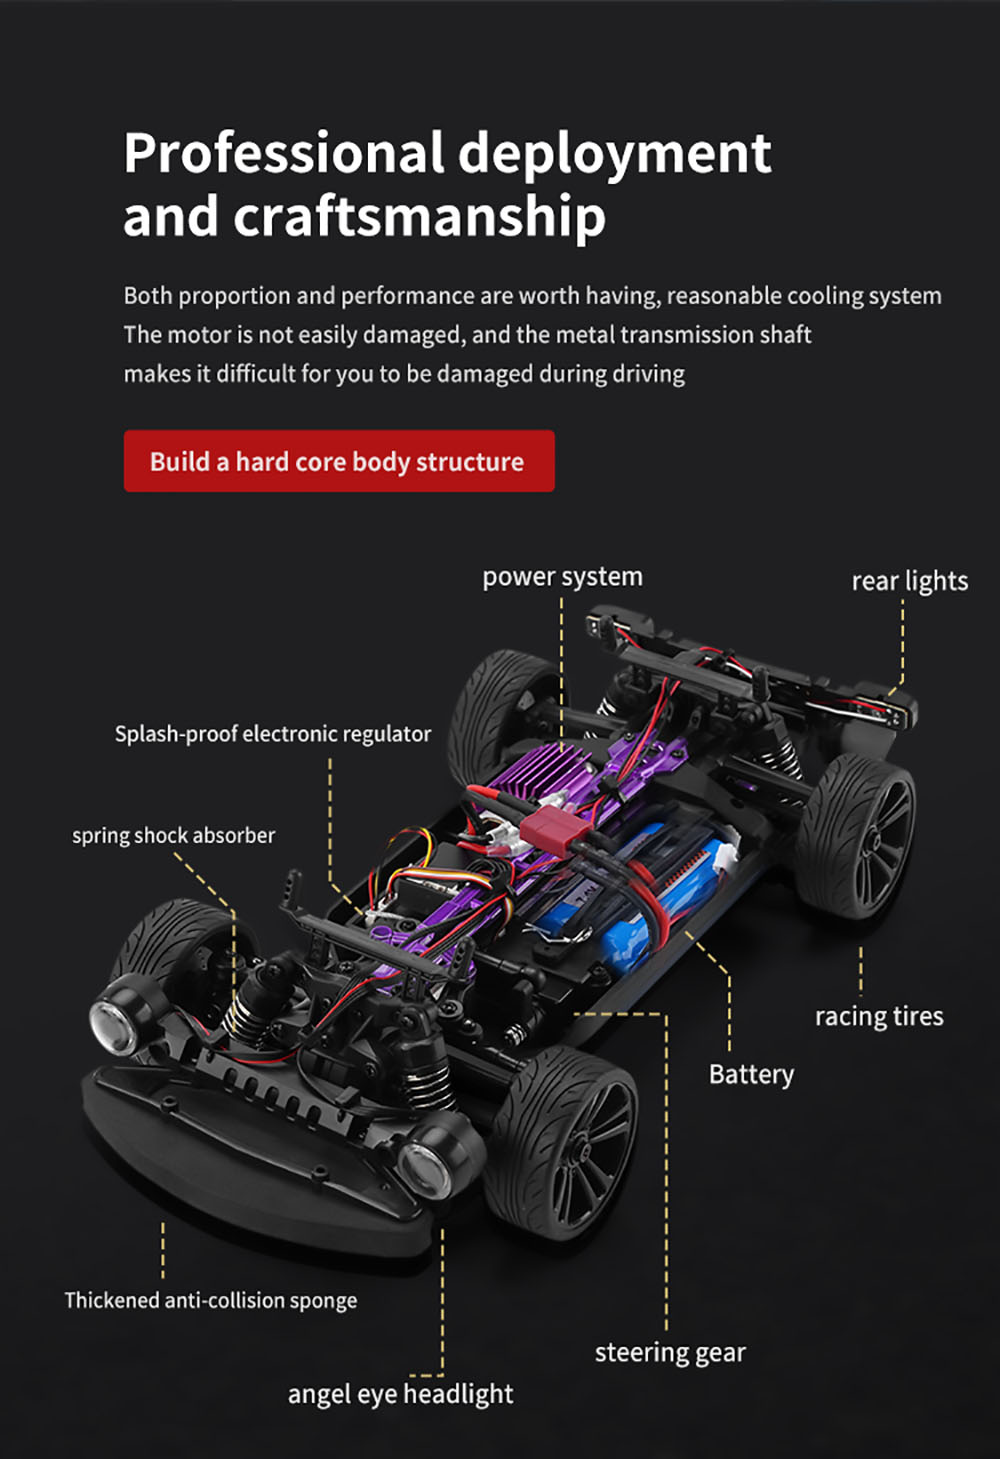 JJRC Q117 E 1:16 2.4G 4WD 35KM/H Drift Car Full Proportional Control with Angle Head Light - Blue